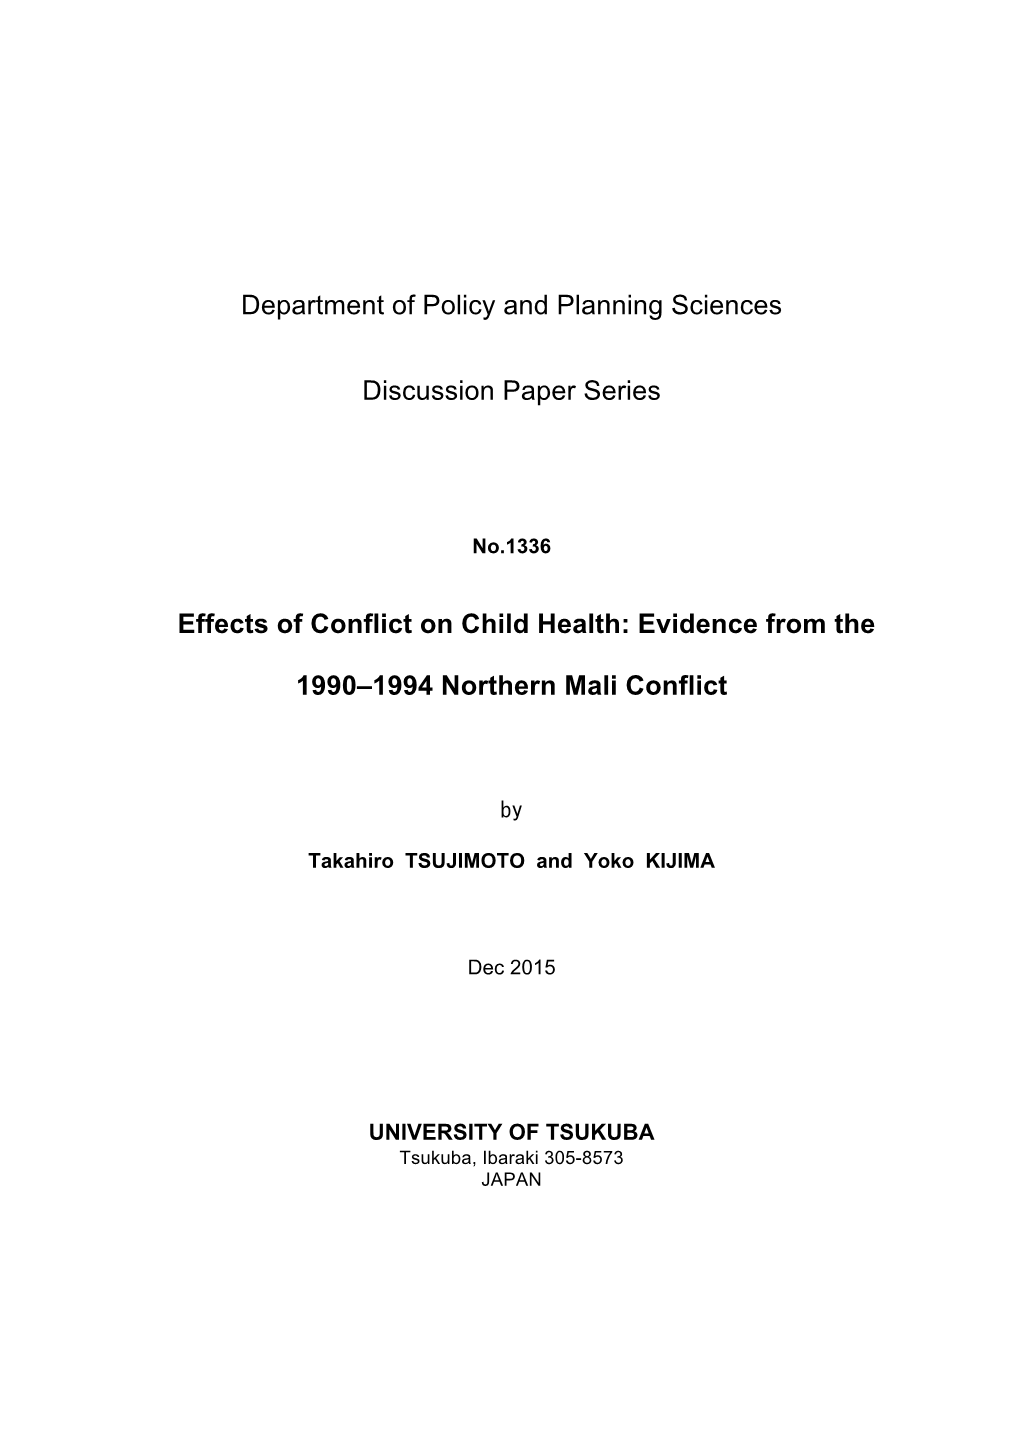 Effects of Conflict on Child Health: Evidence from The